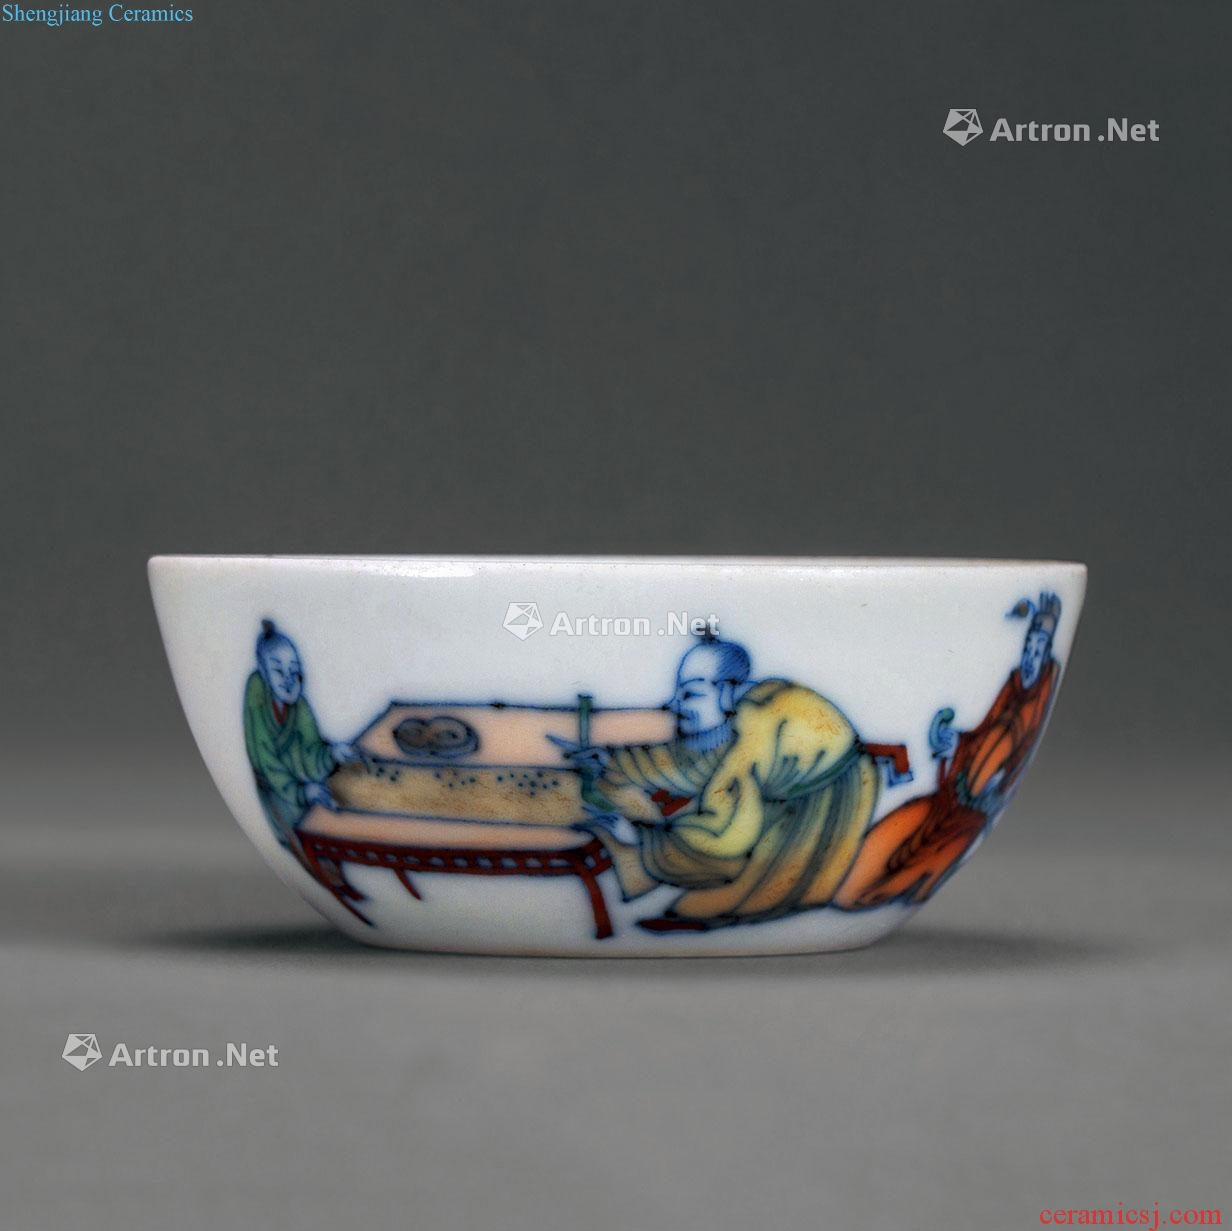 The Qing Dynasty A BLUE FAMILLE ROSE BOWL